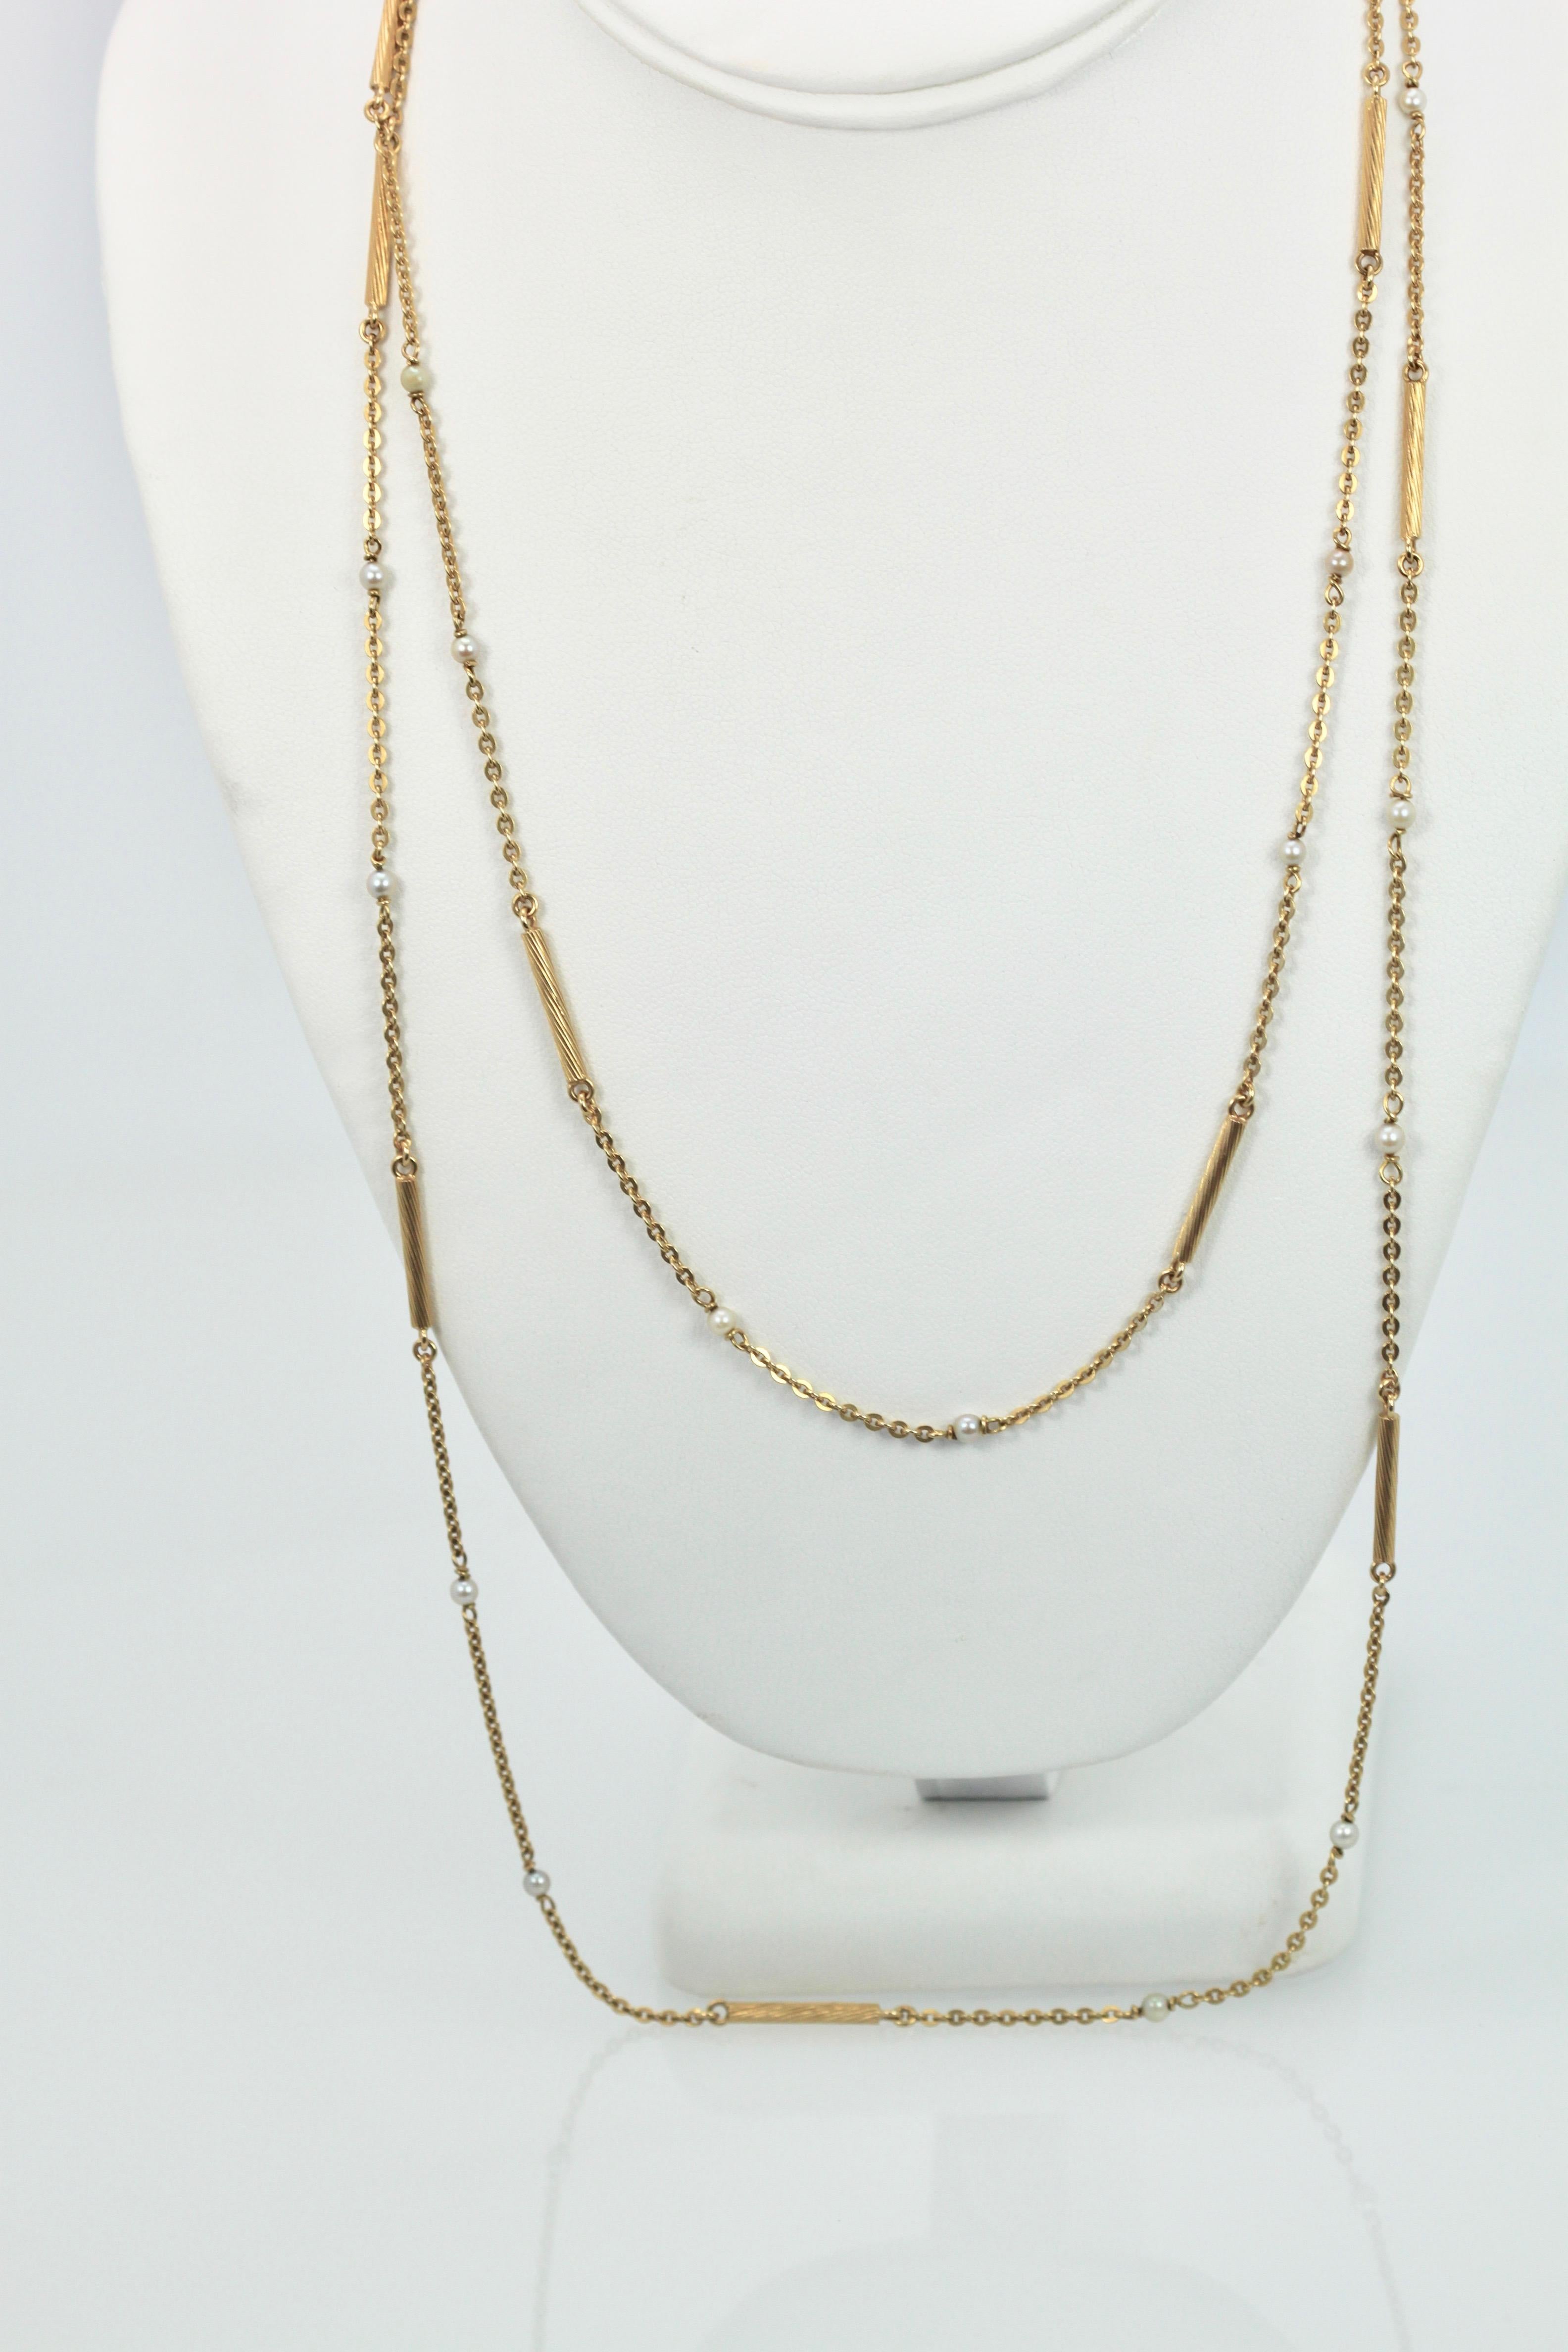 Round Cut Seed Pearl Chain Extra Long 18 Karat Yellow Gold